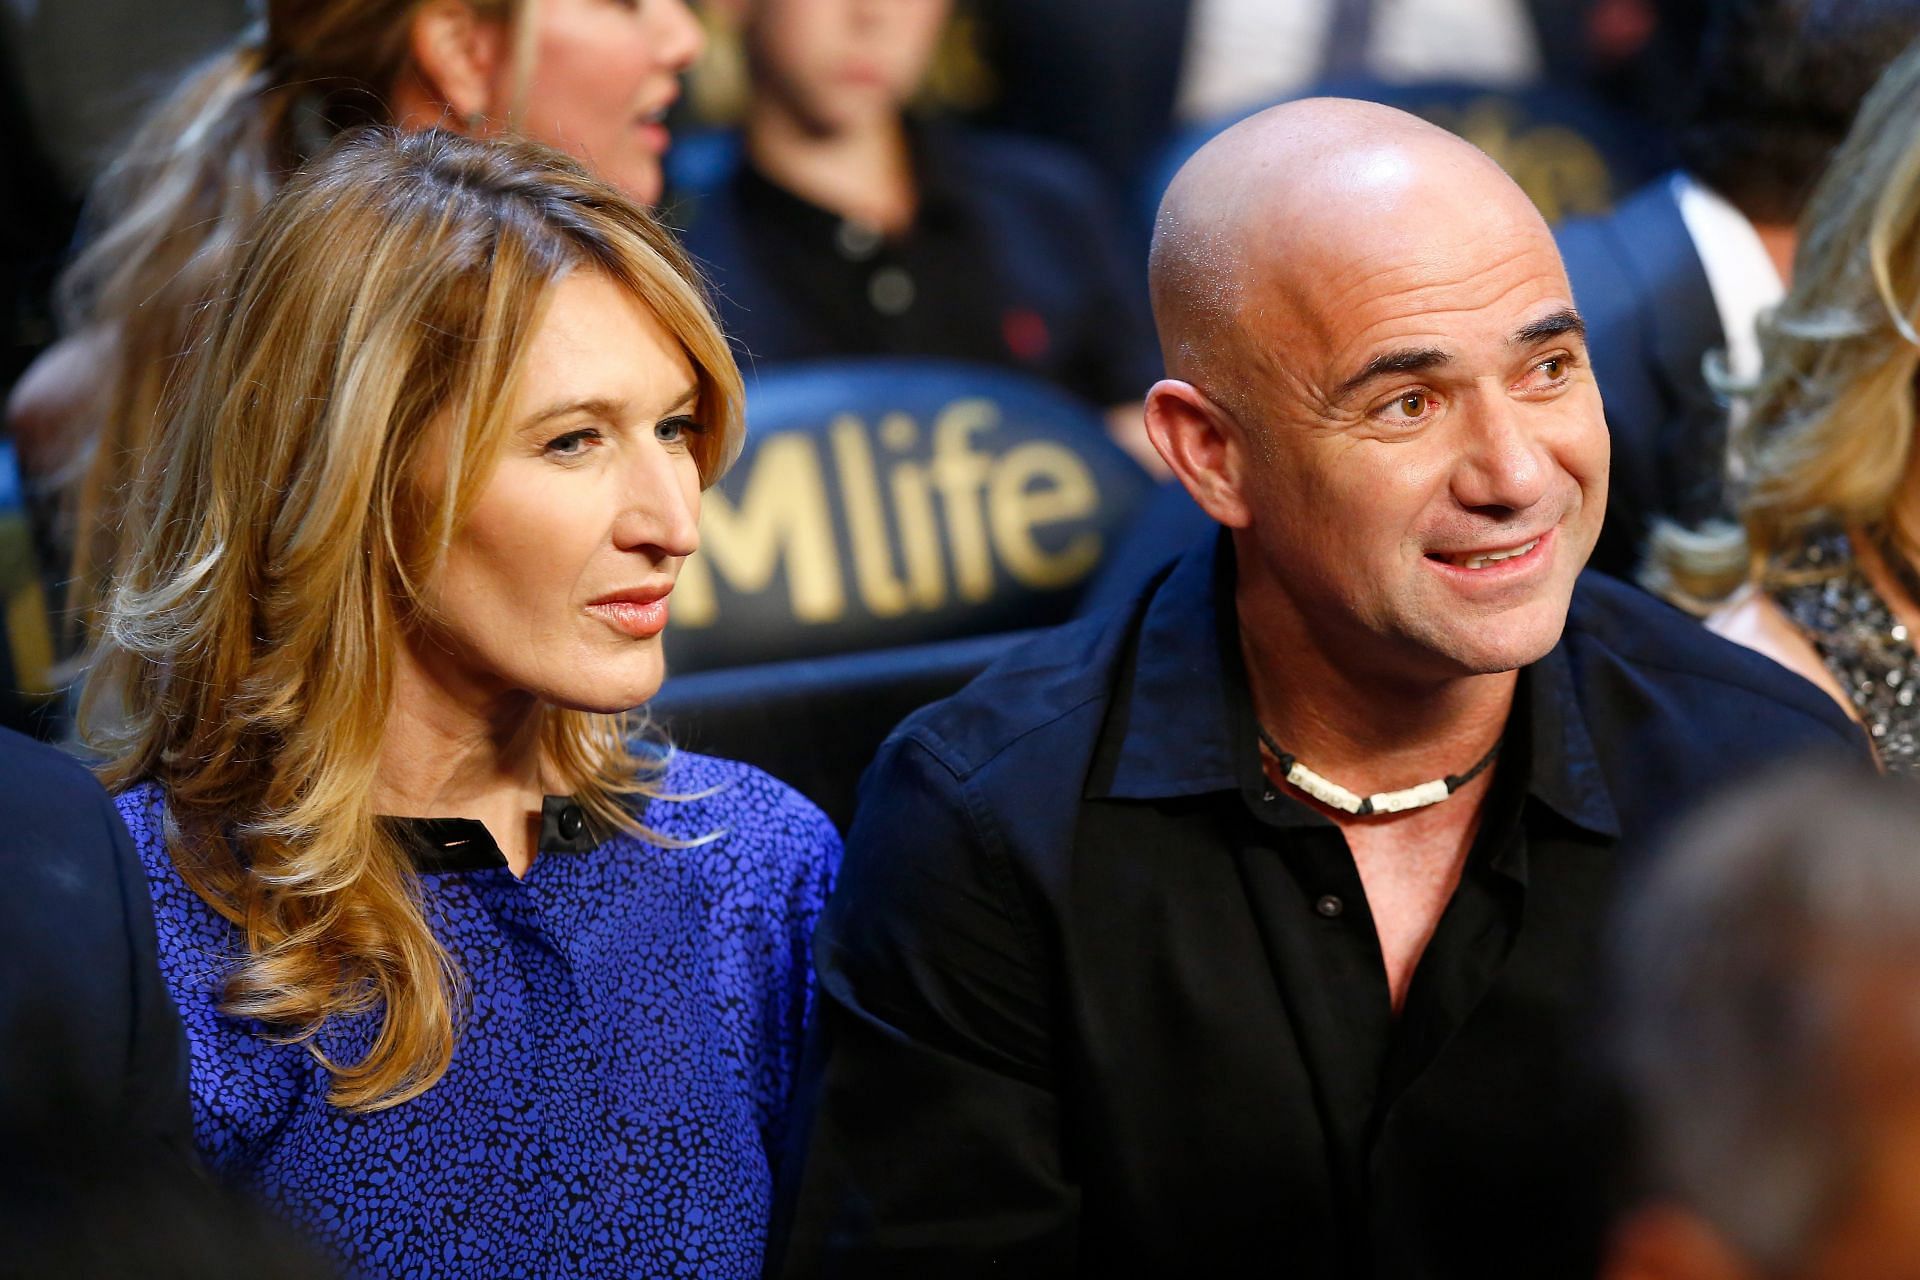 Steffi Graf and Andre Agassi watch the Leo Santa Cruz-Jose Cayetano featherweight bout in 2015